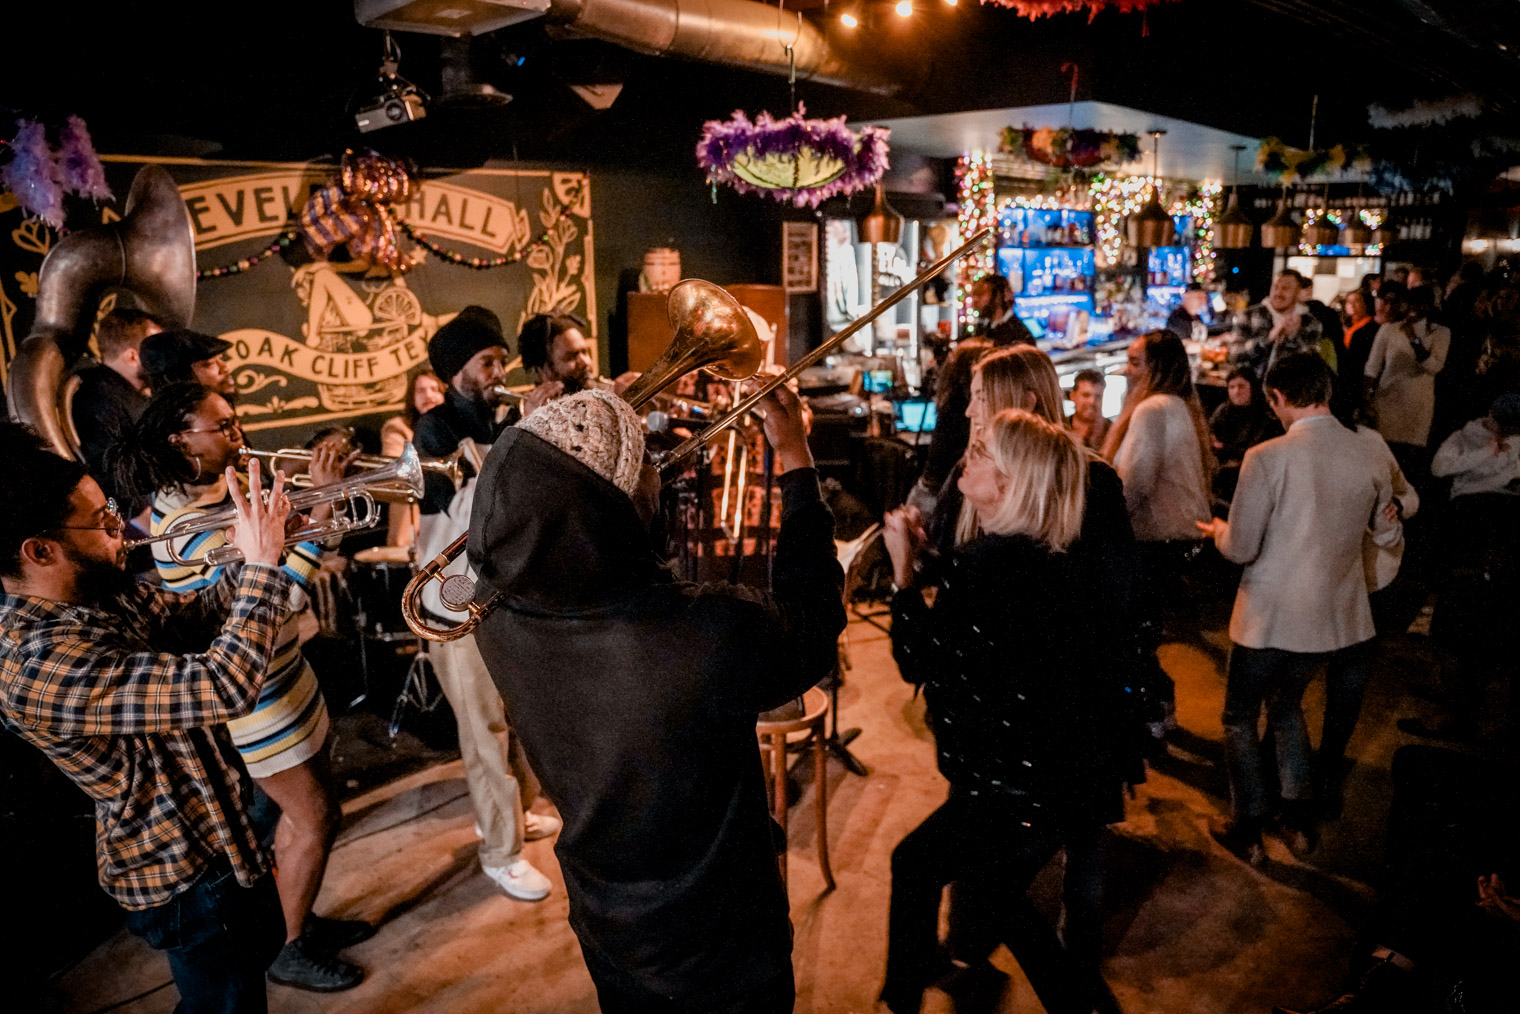 People playing music, people dancing inside a small venue